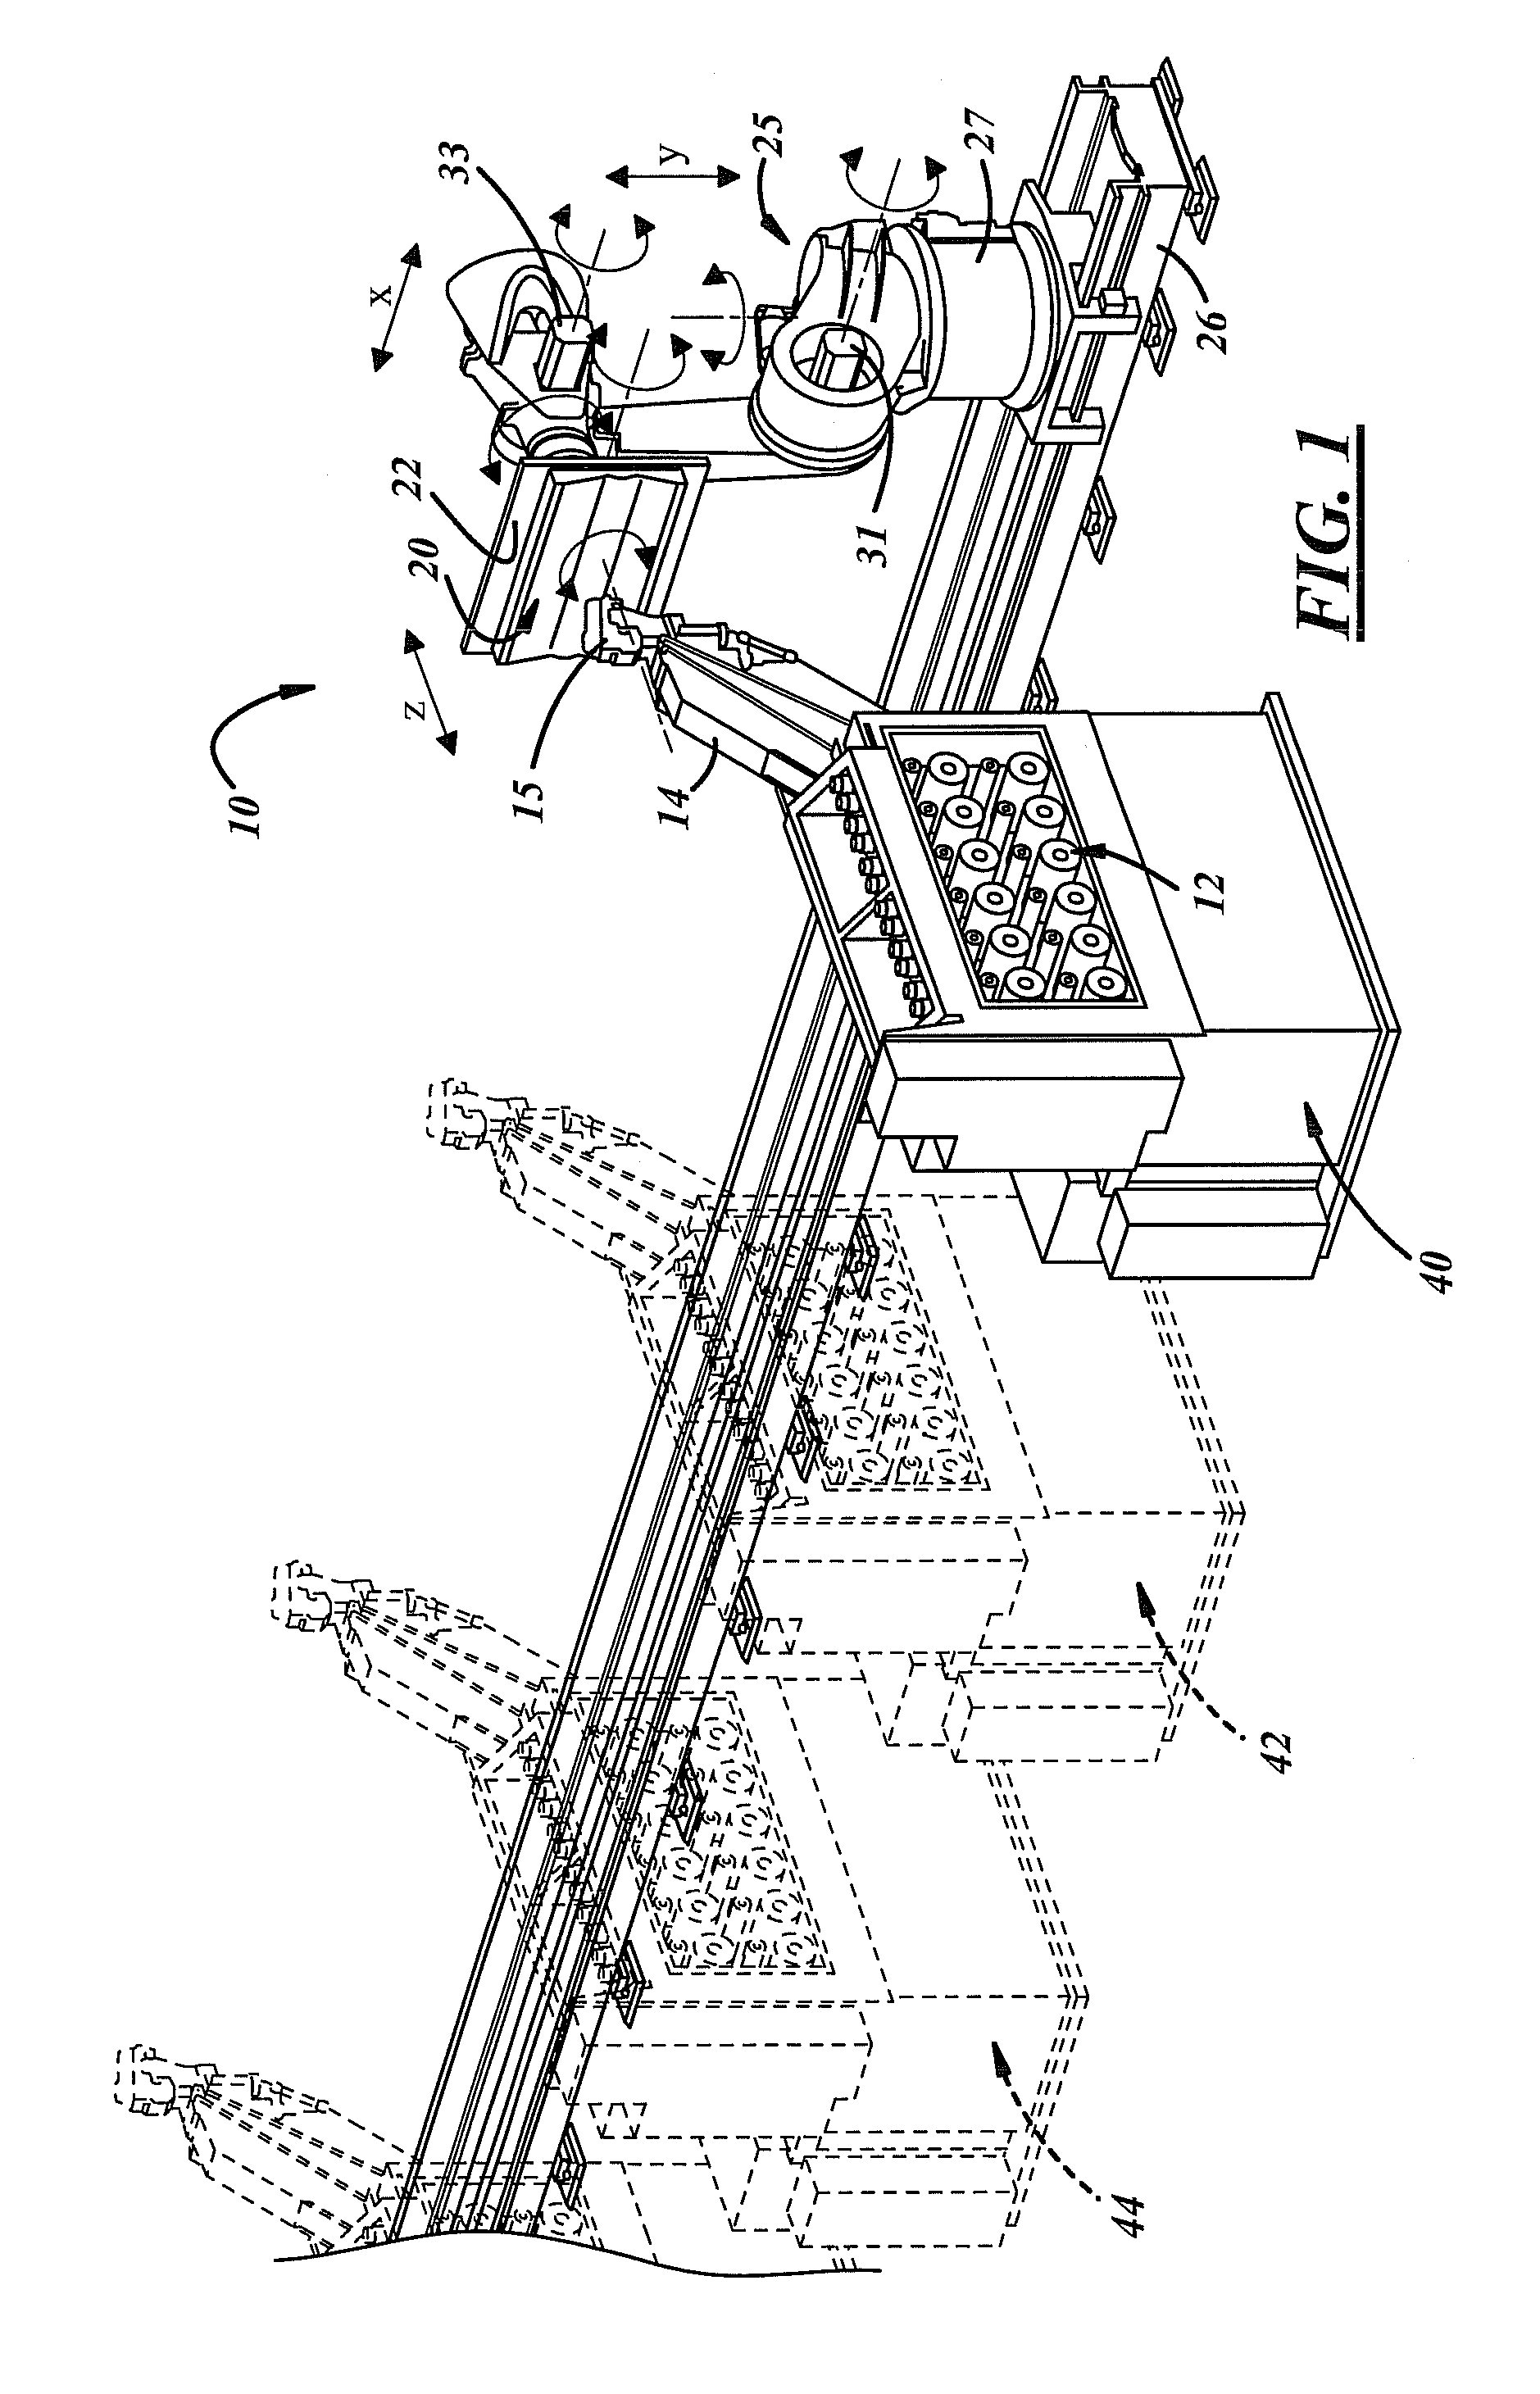 Robotic based fiber placement cell with stationary dispensing head and creel